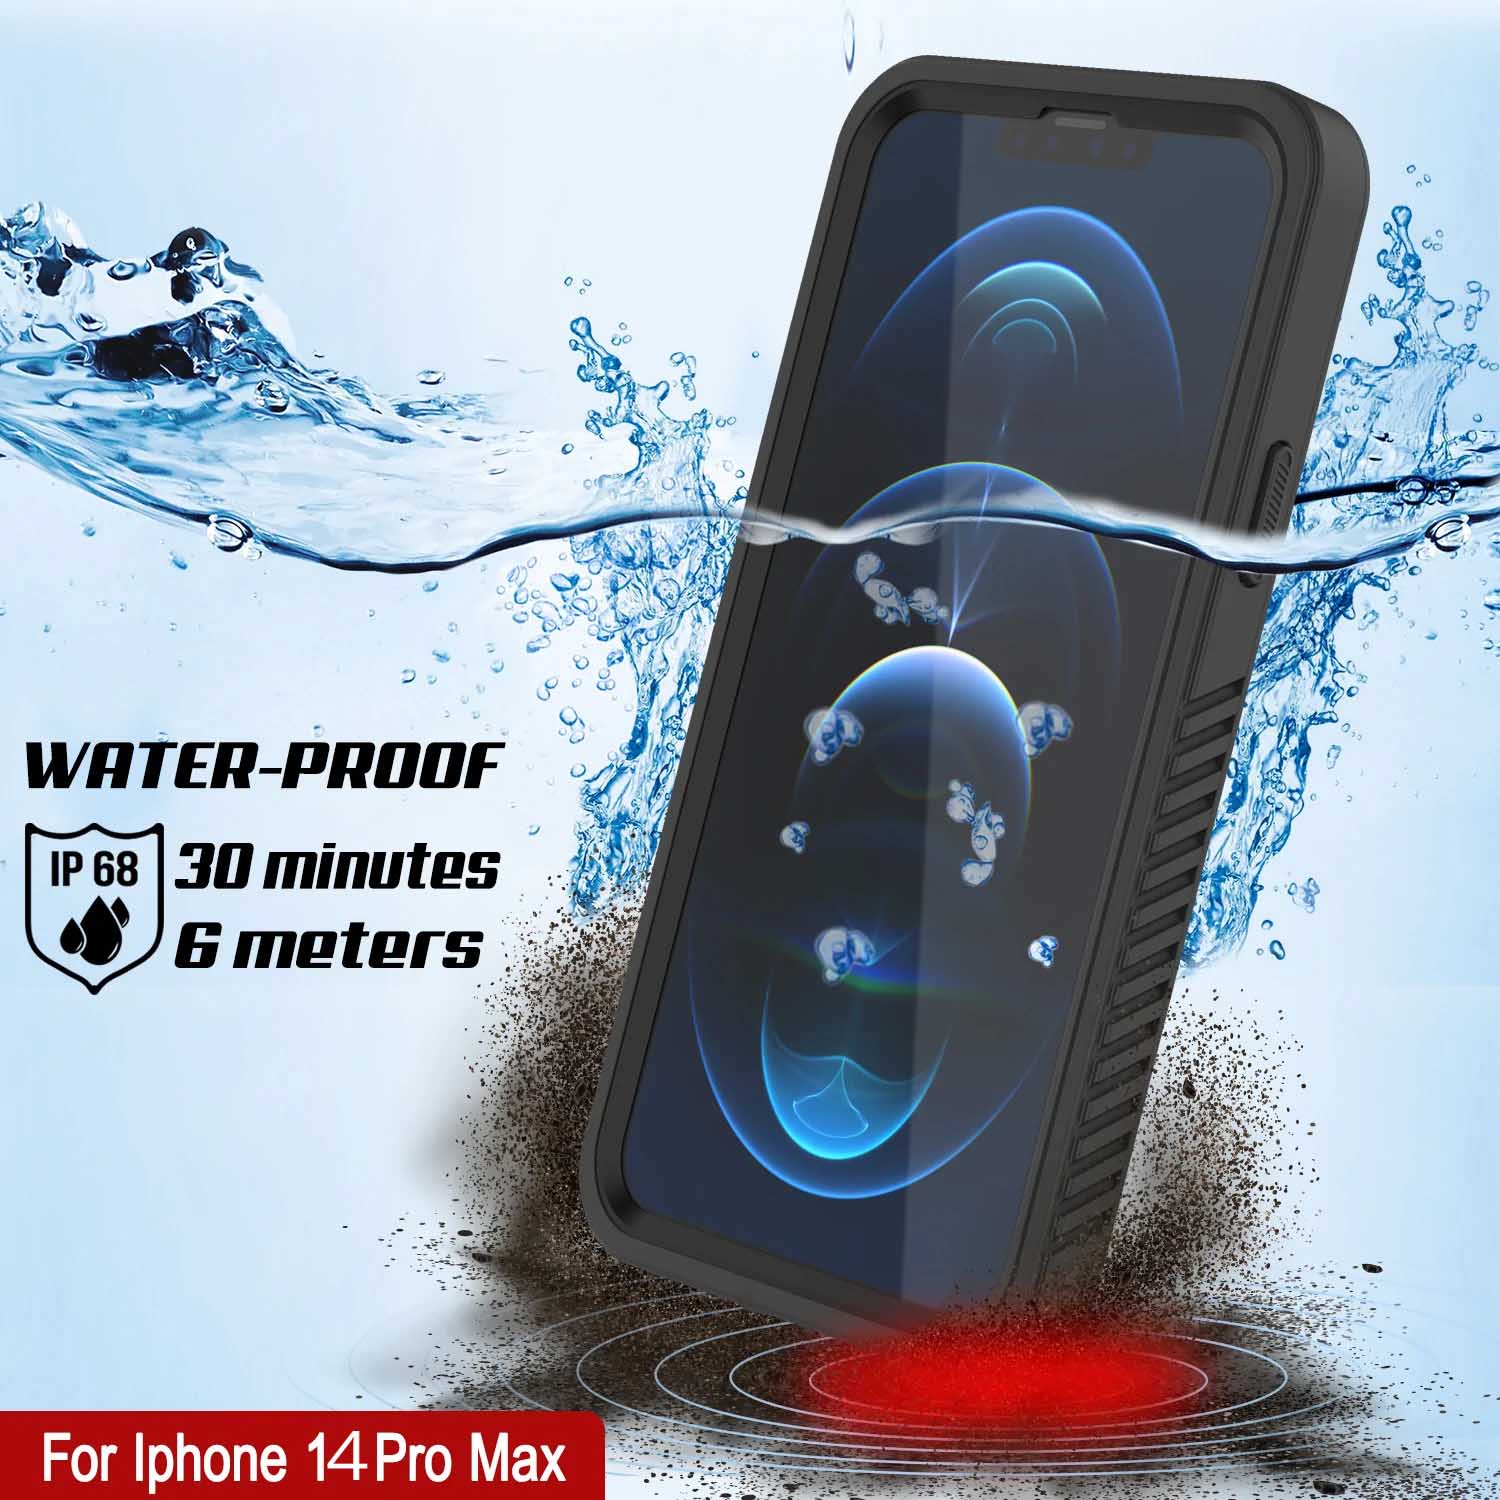 iPhone XS Max Waterproof Case, Punkcase [Extreme Series] Armor Cover W –  punkcase